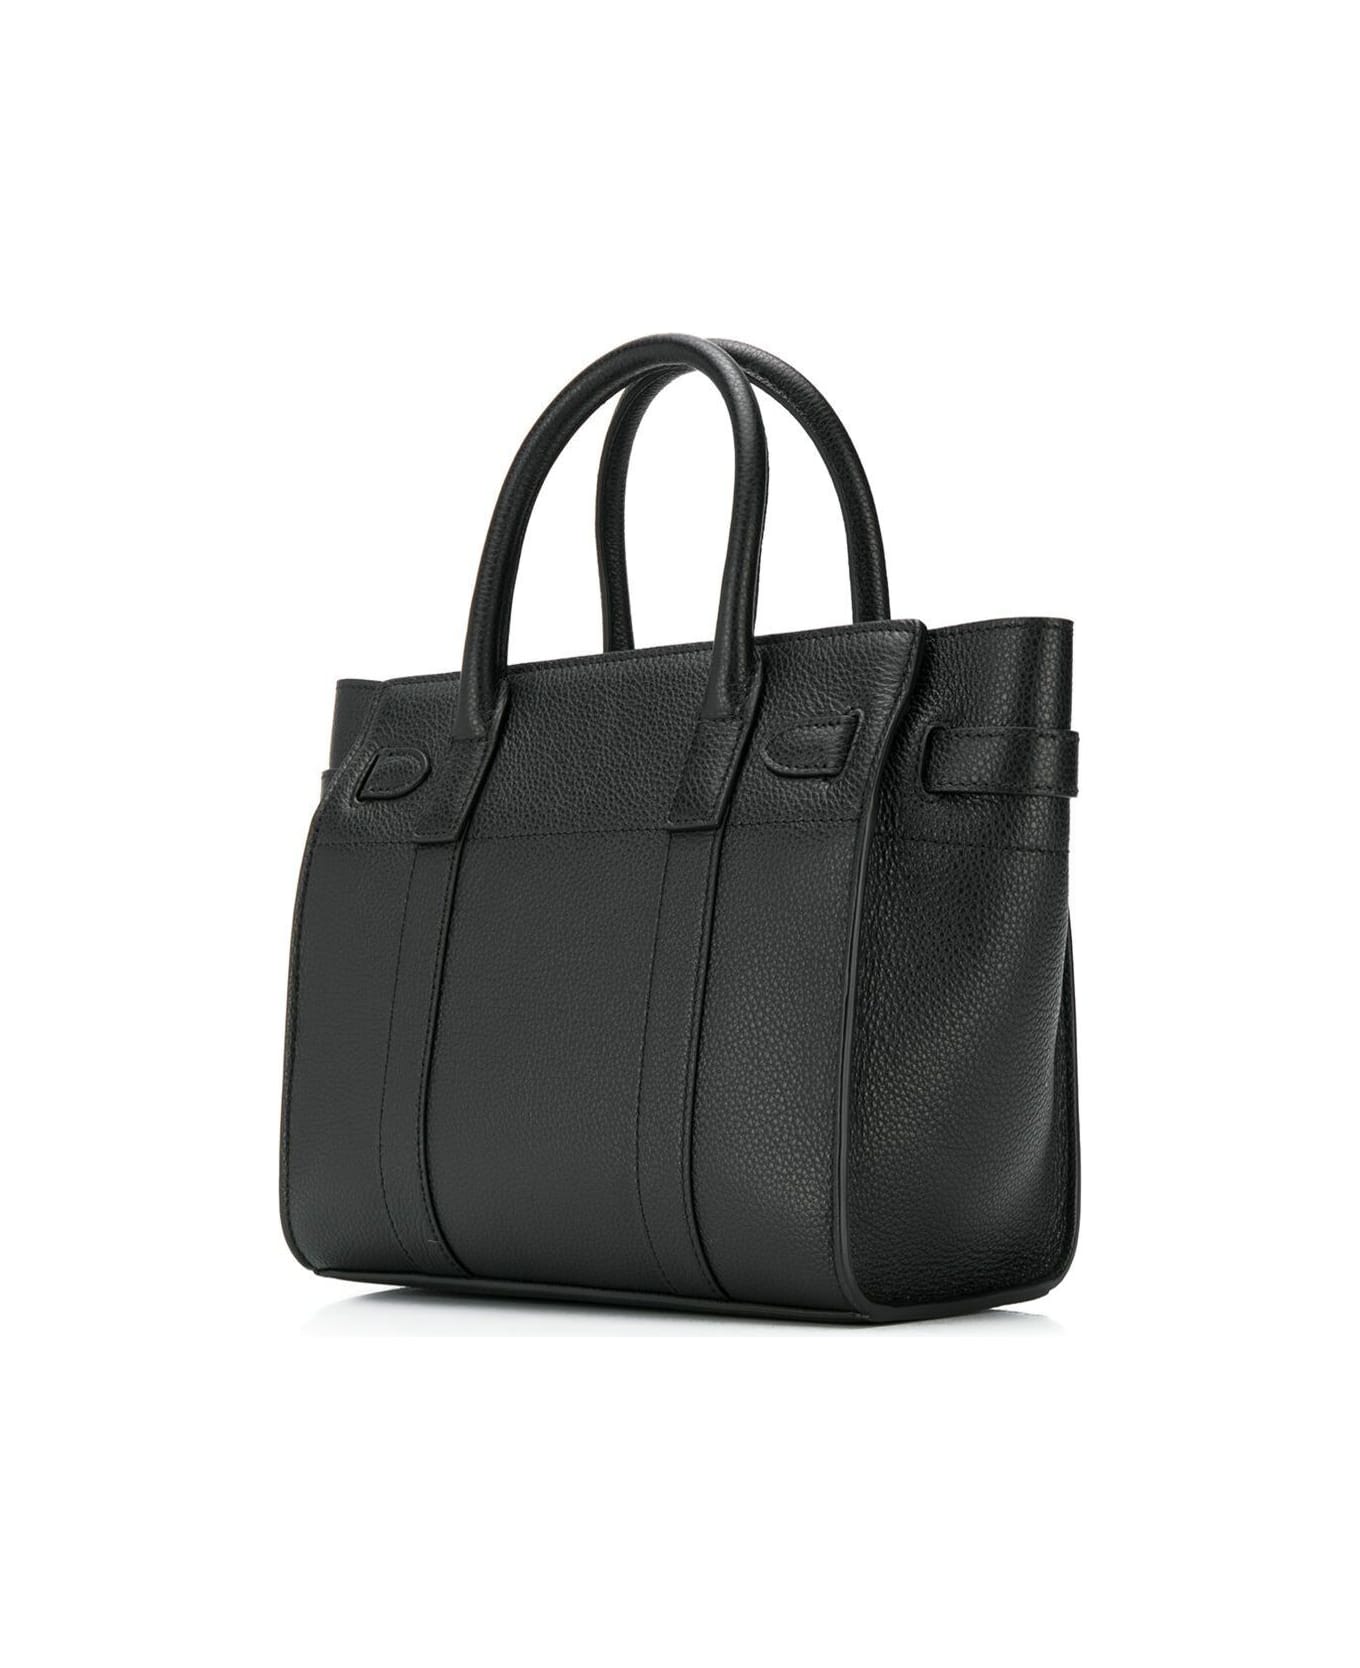 Mulberry Batswater Small Black Leather Handbag Mulberry Woman - Black トートバッグ